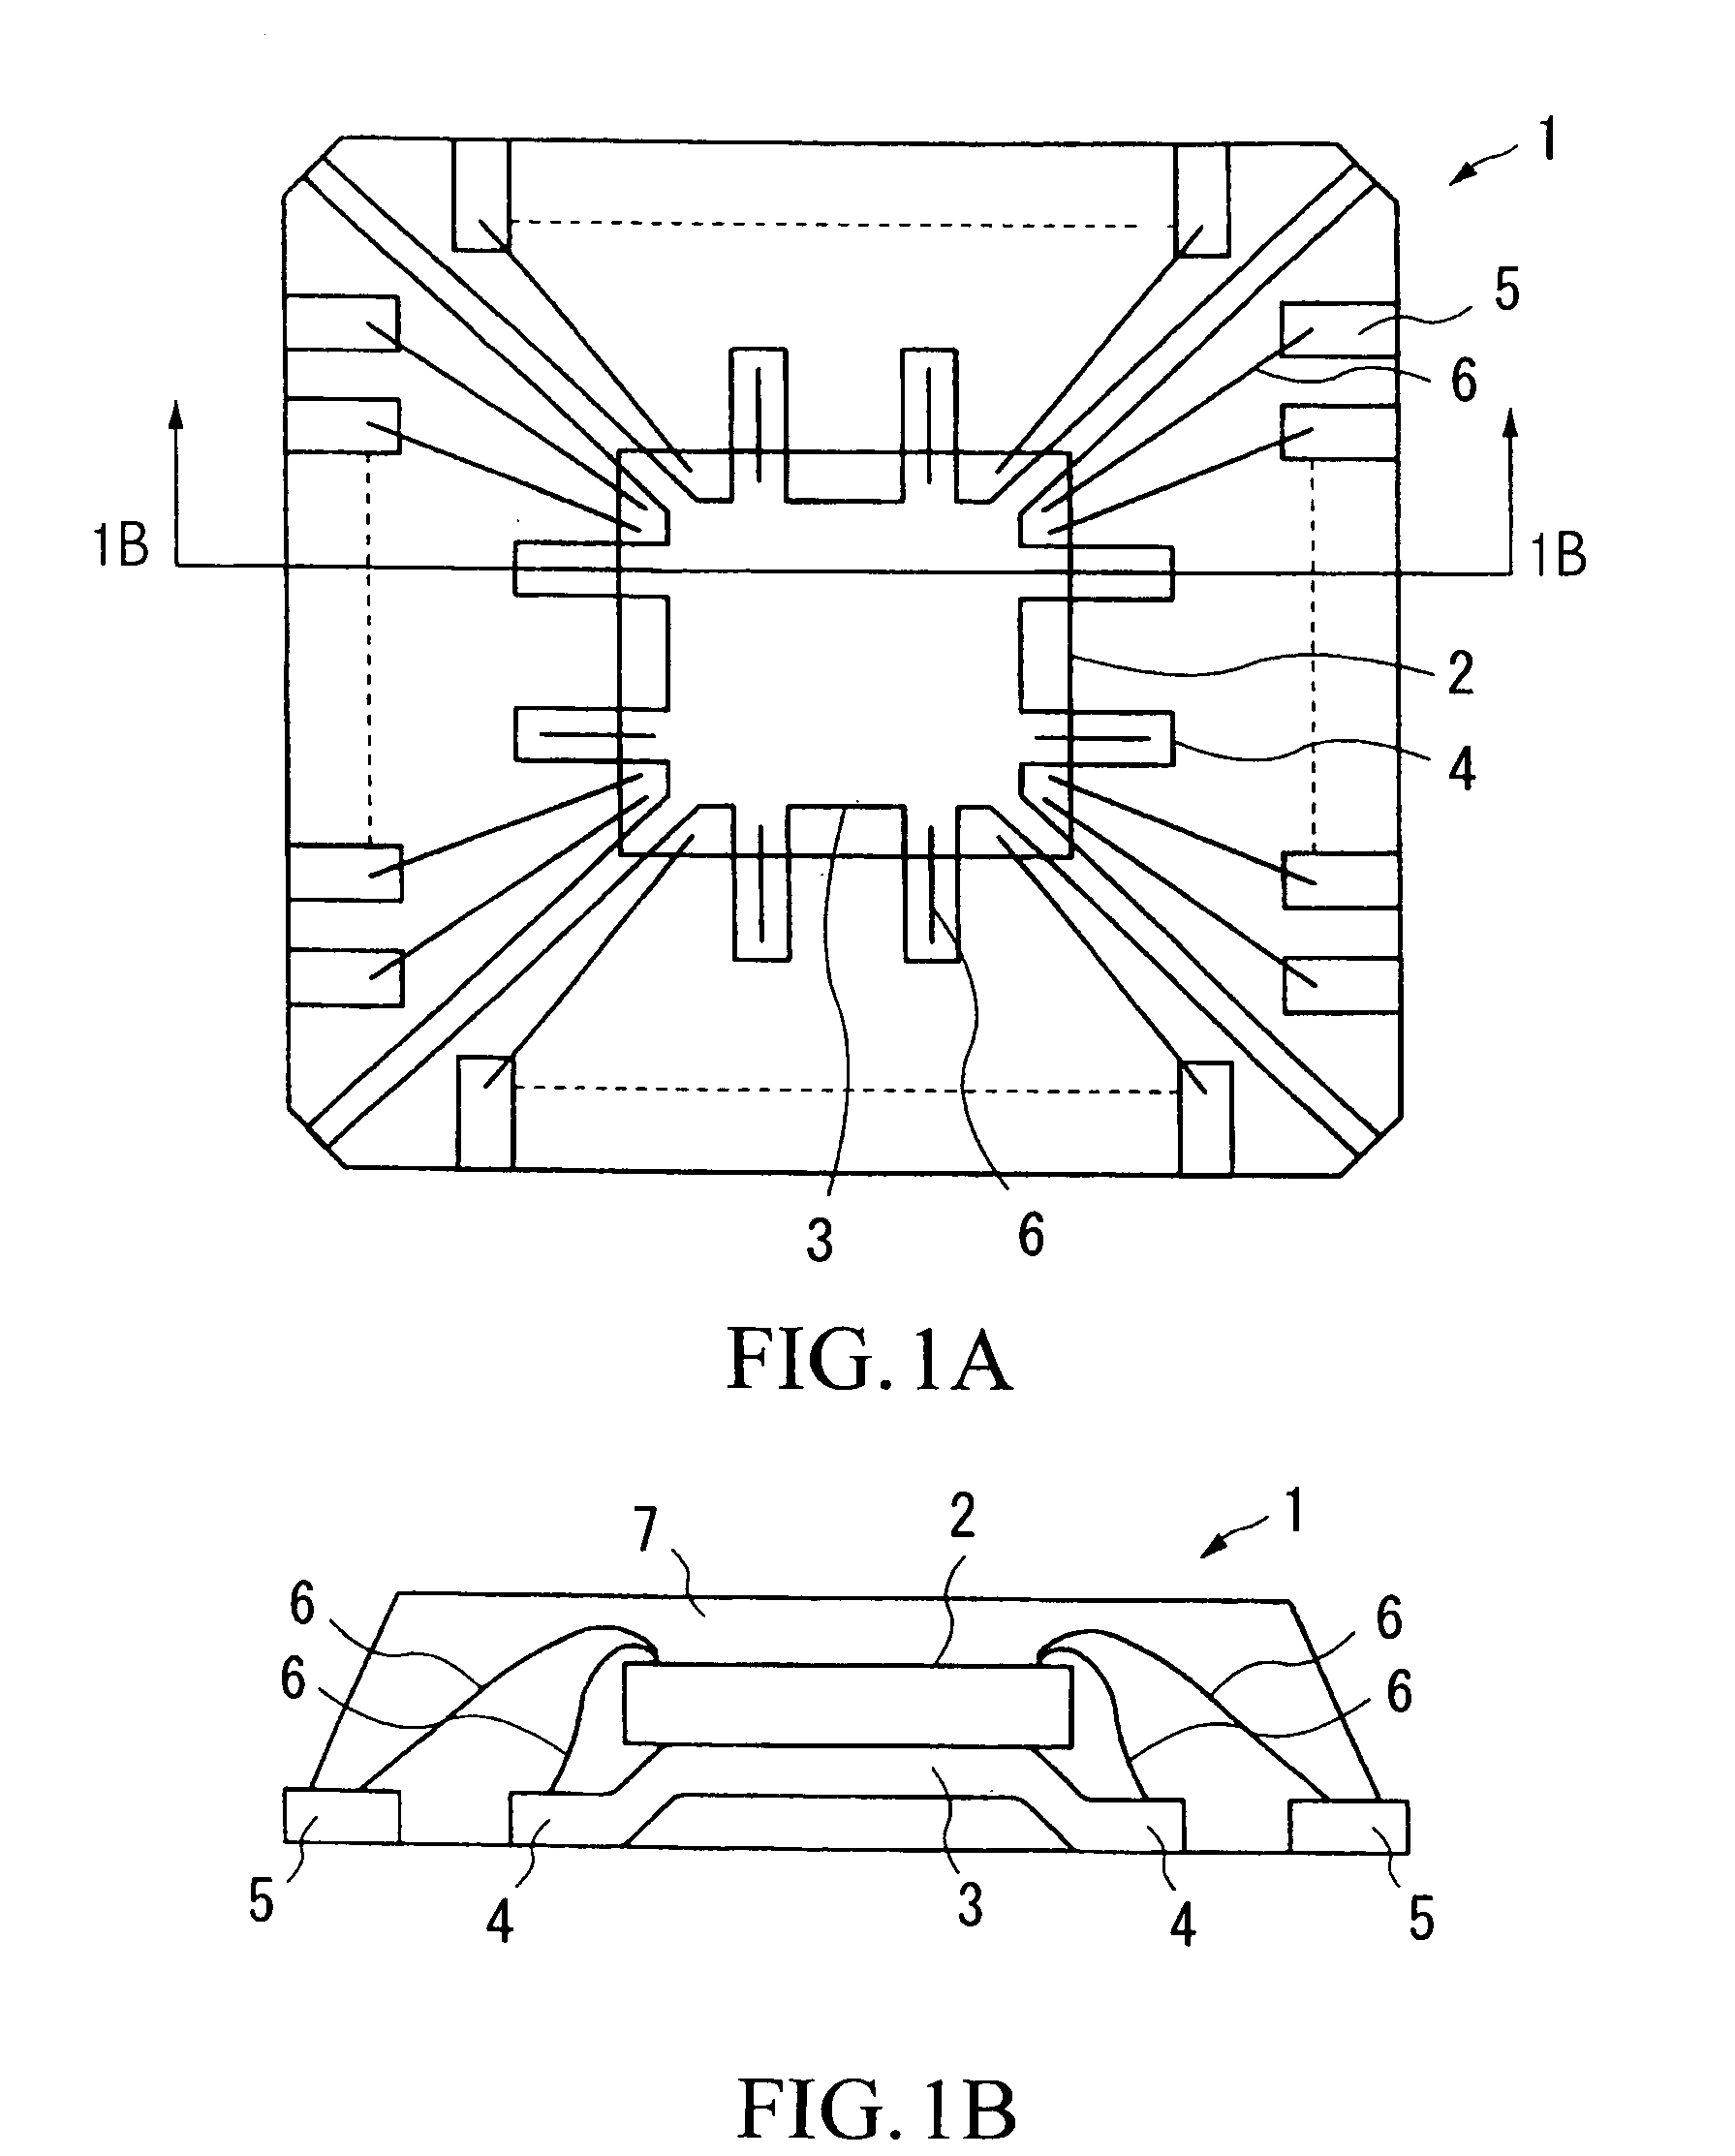 Semiconductor device and package, and method of manufacture therefor